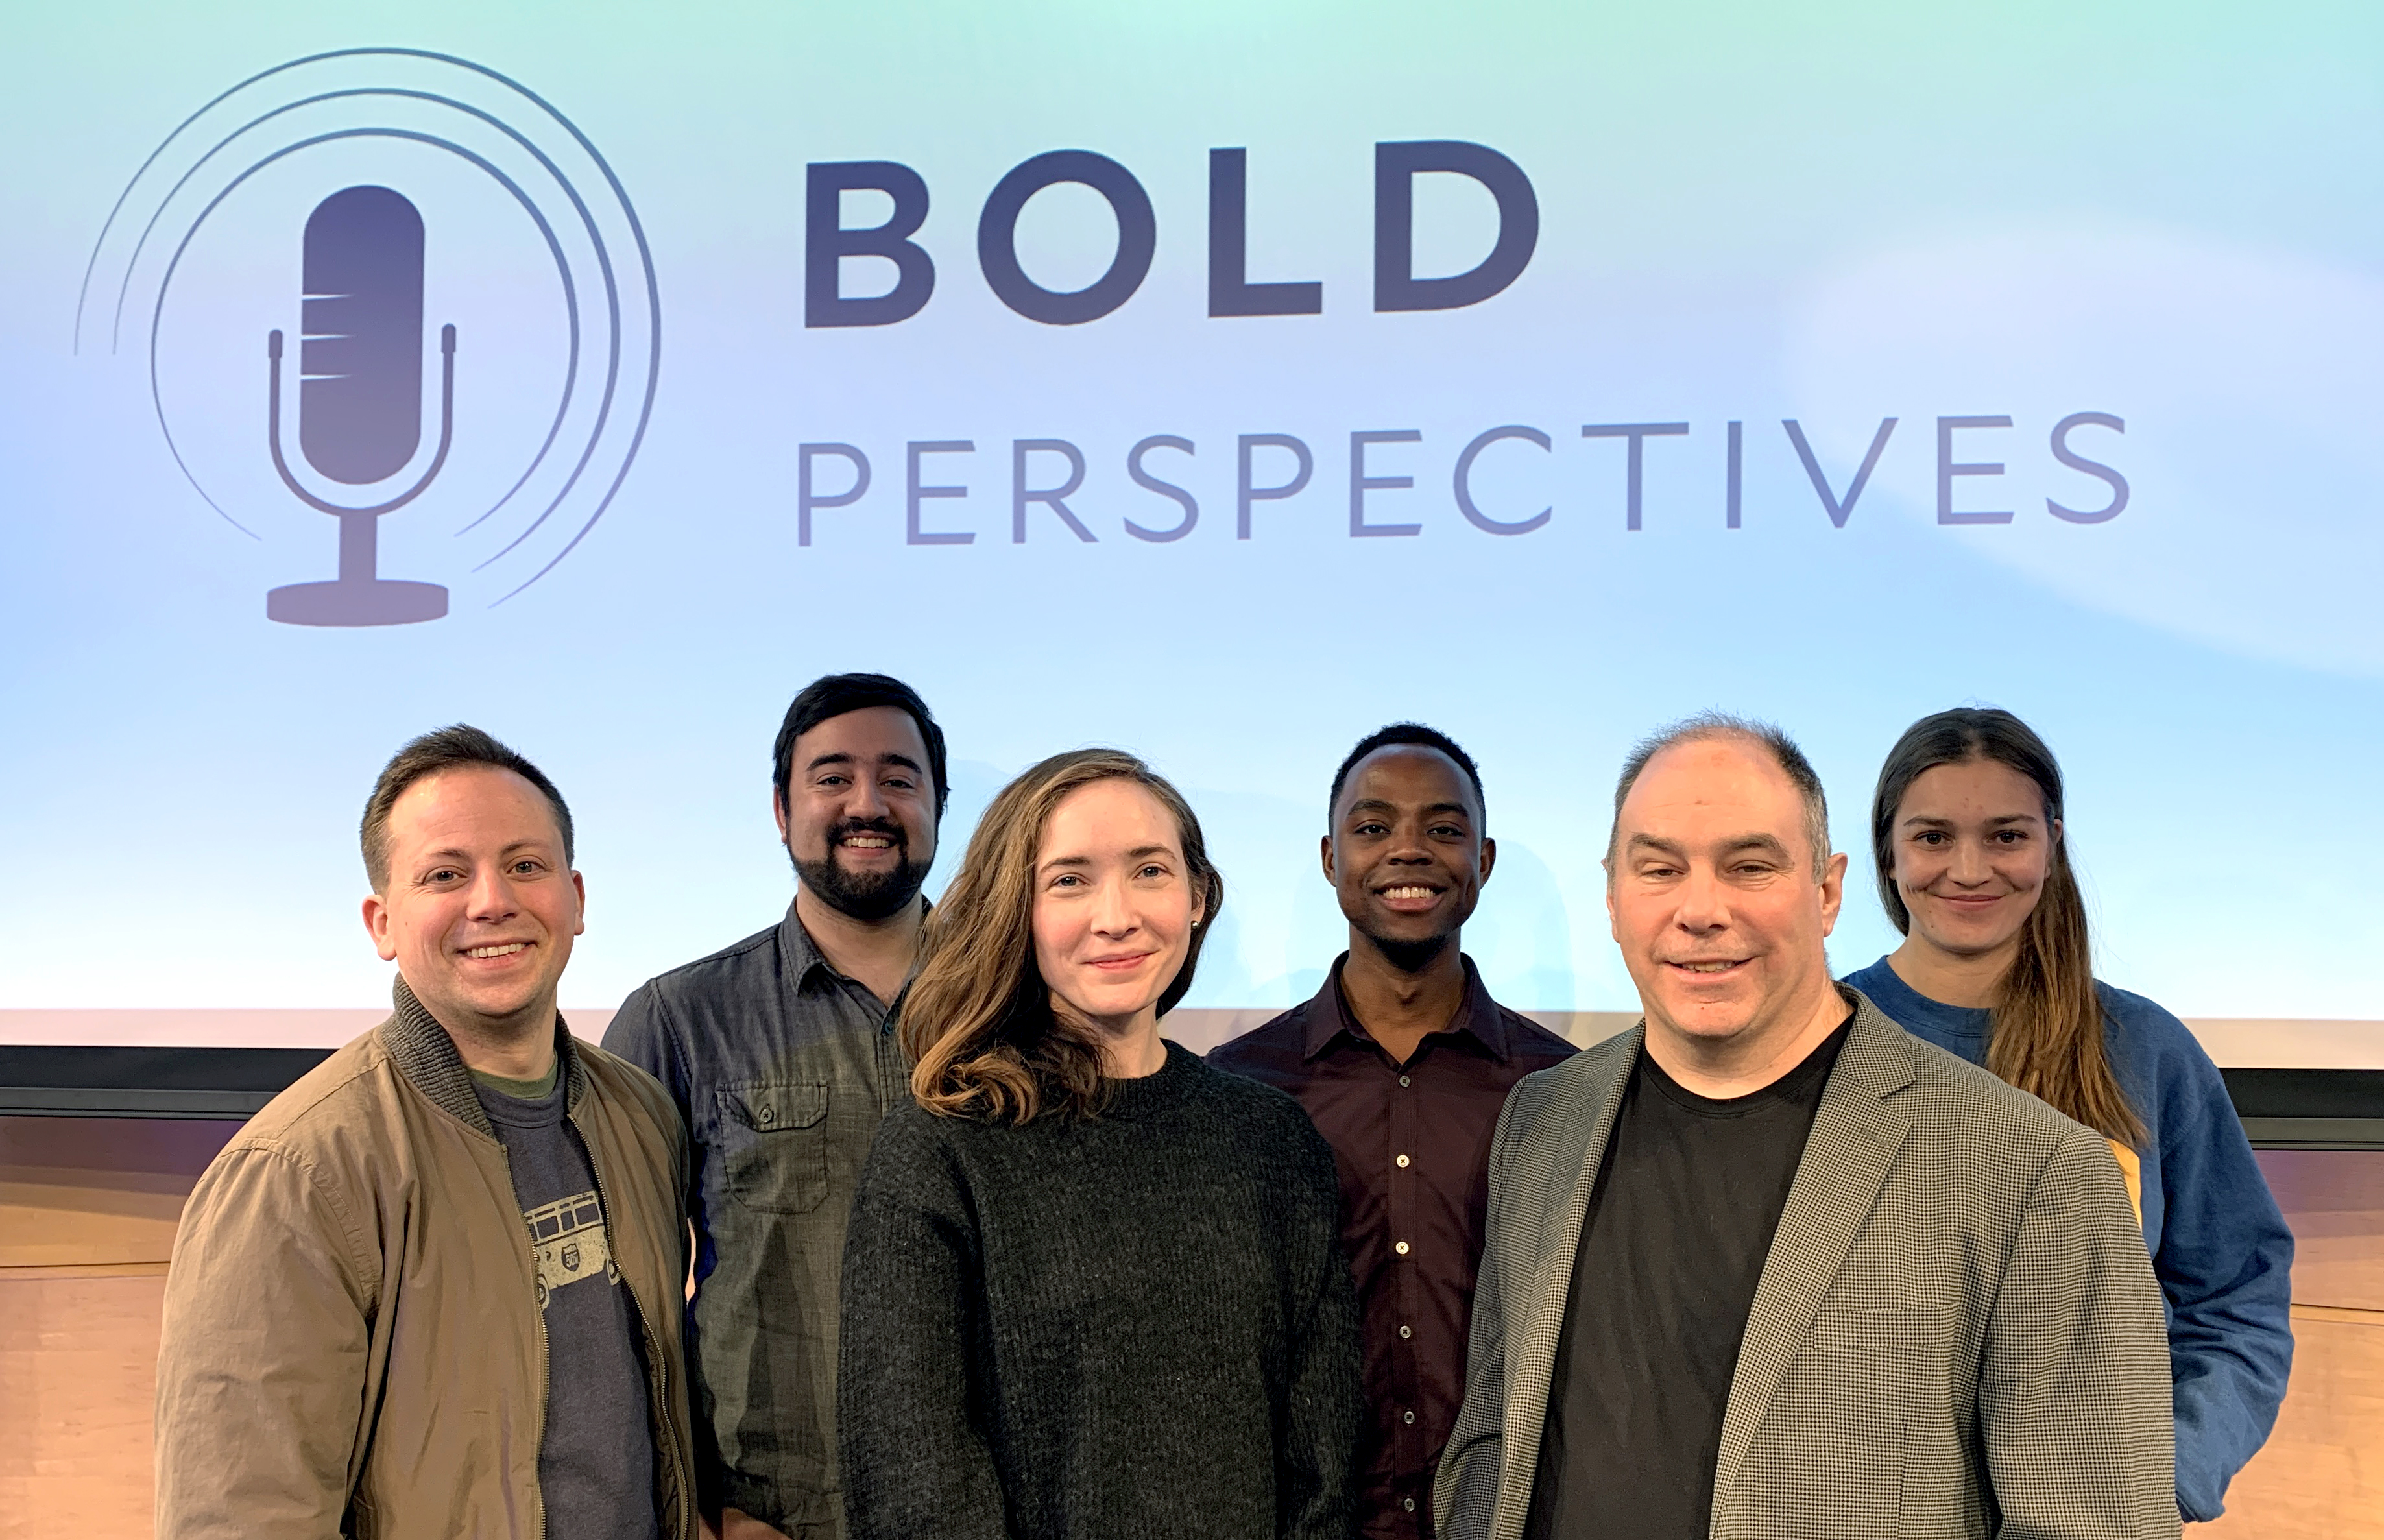 BOLD Perspectives NYC Speakers, from L to R: Cody Pomeranz ’15, Robert Scaramuccia ’19, Dr. Kristin Budde, Johnathan Terry ’17, Matthew Dicks, and Natalina Lopez ’16.